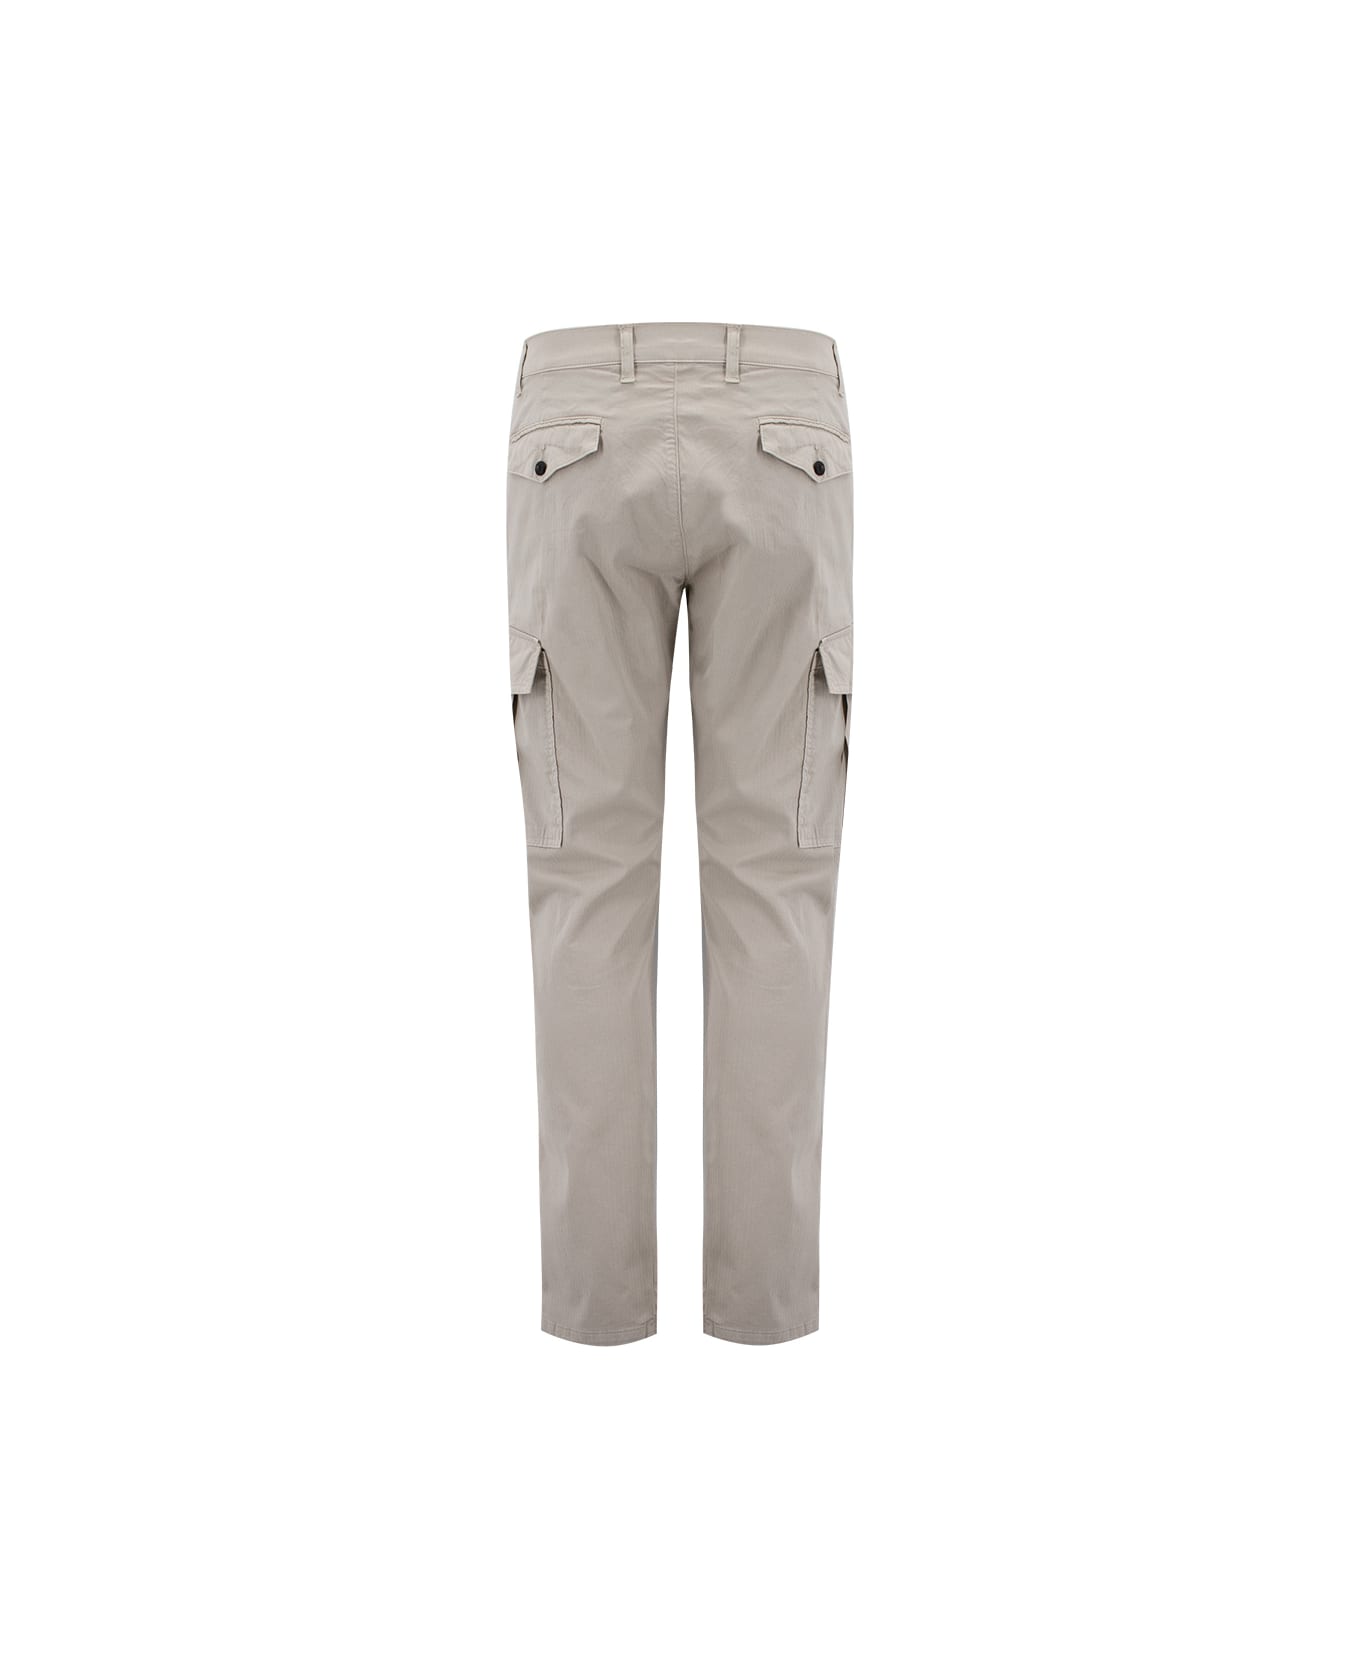 Eleventy Trousers - SAND